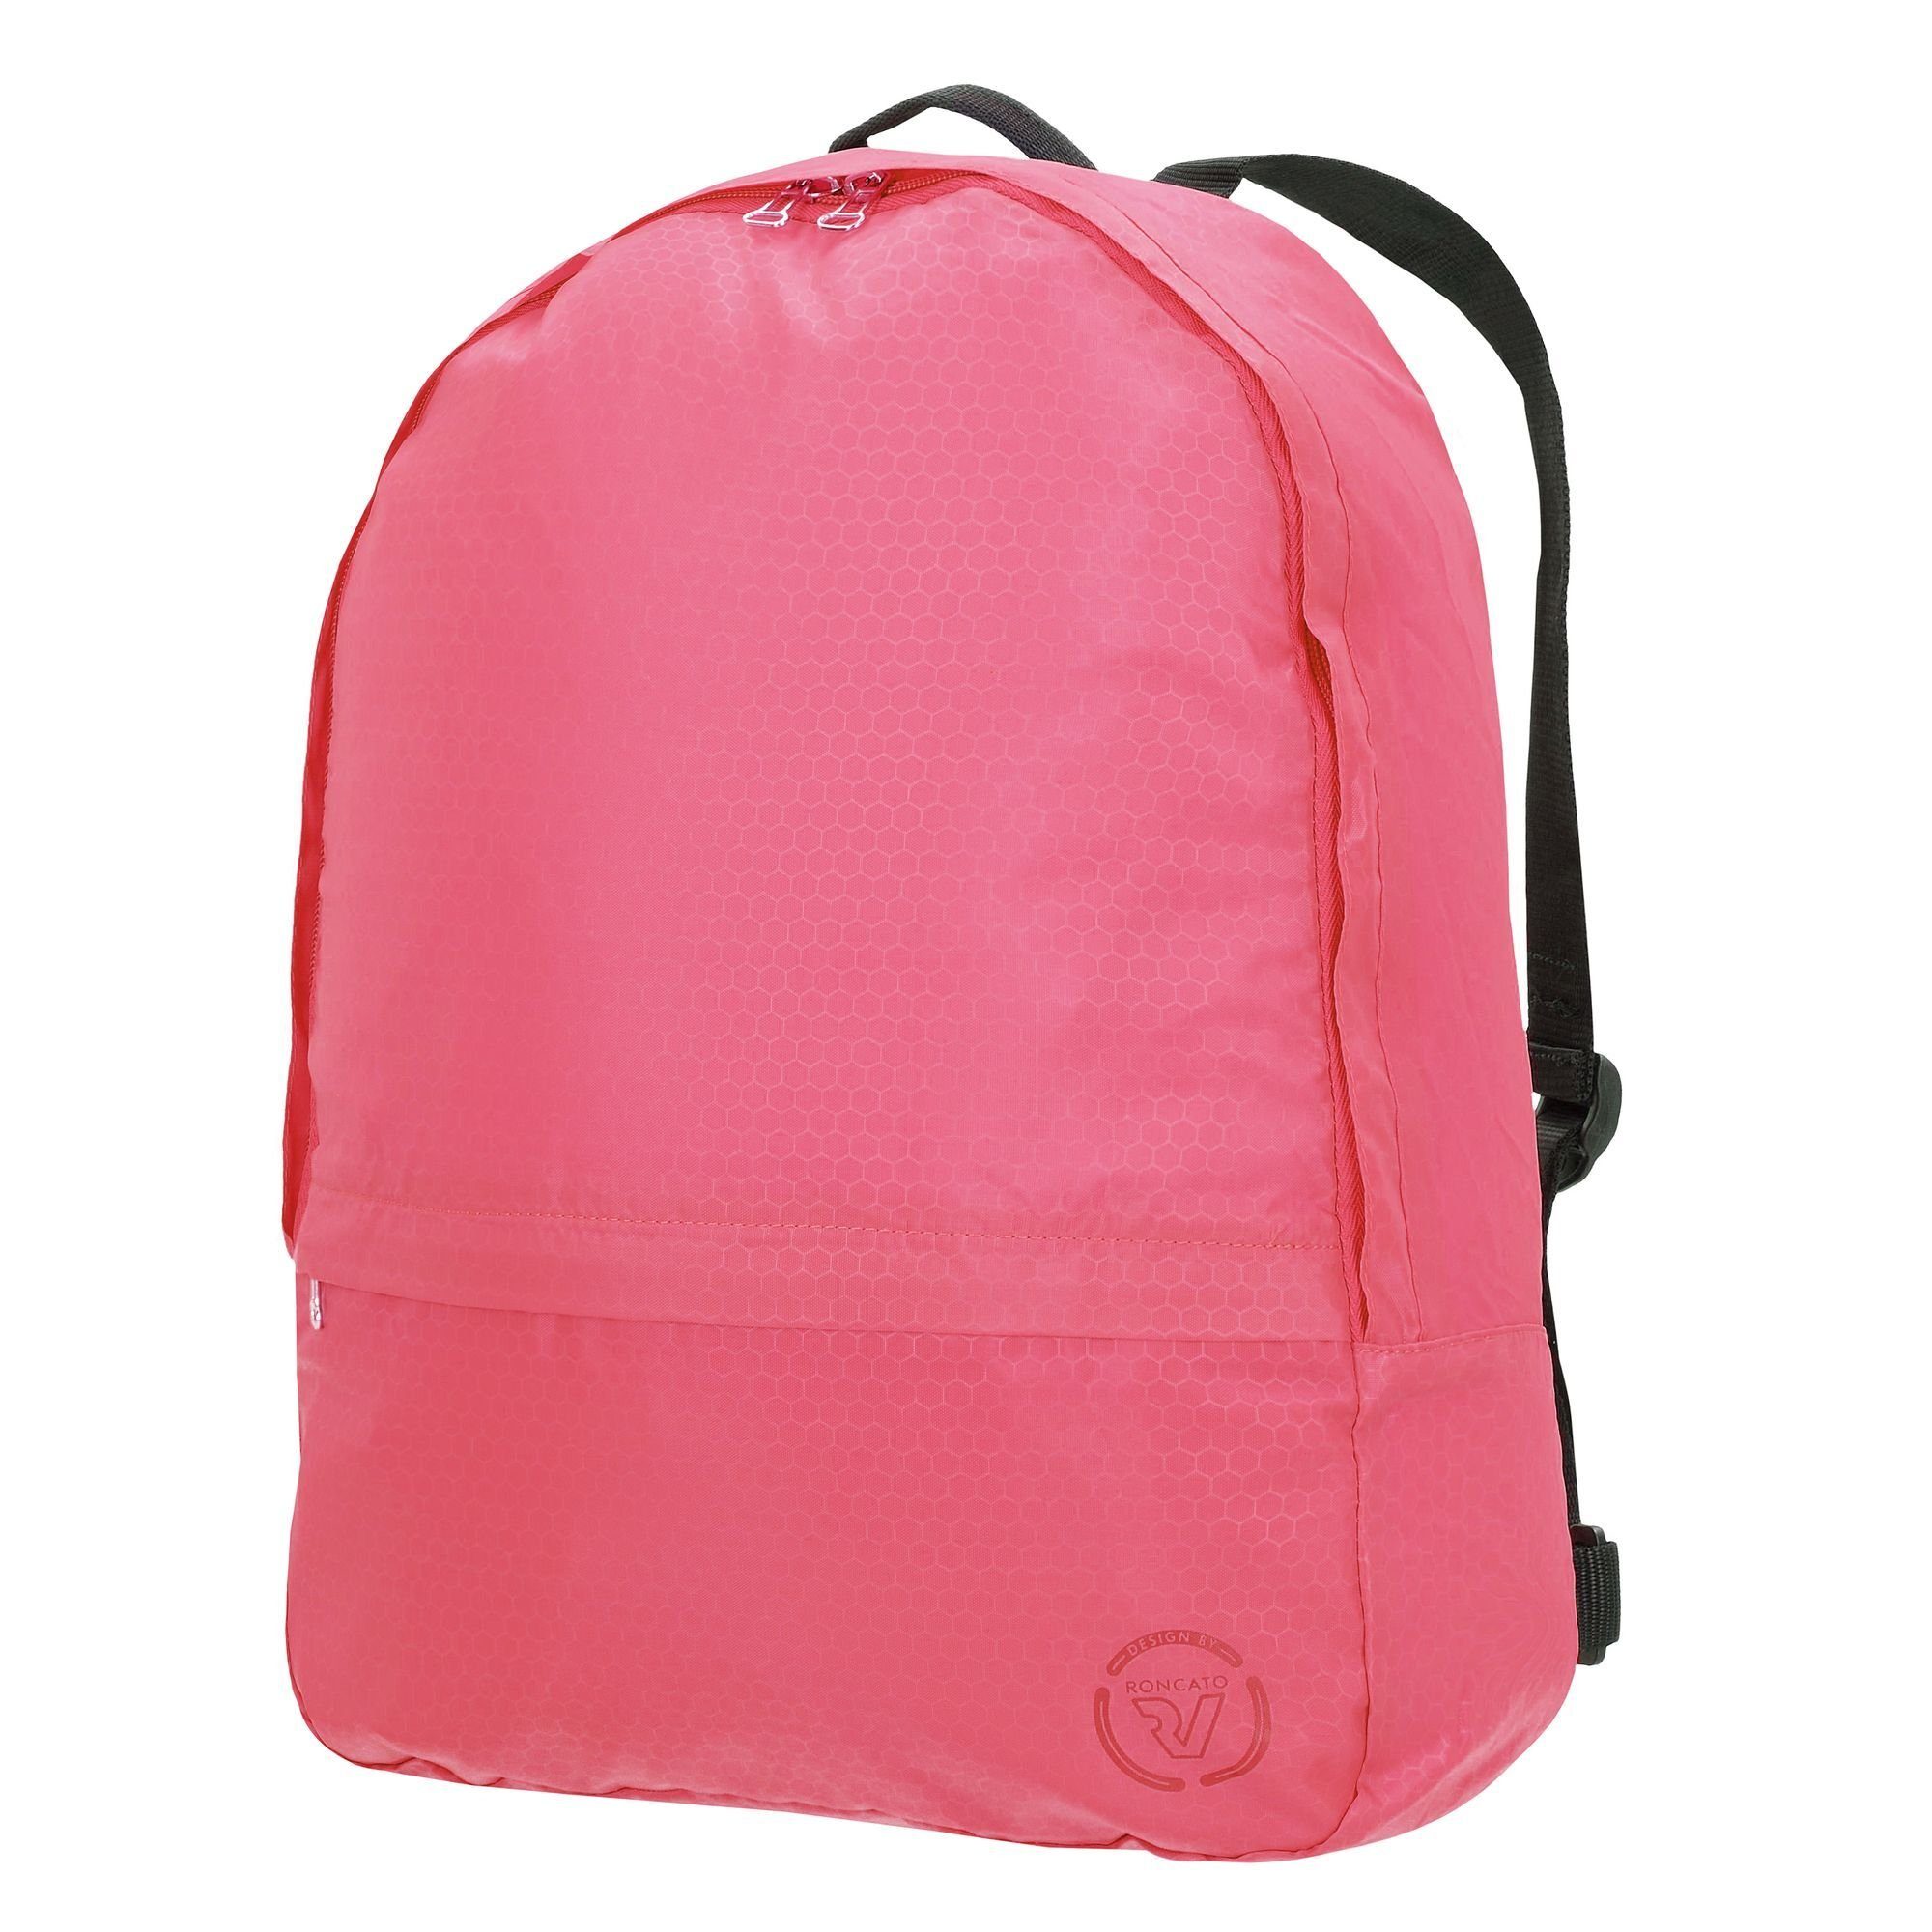 Foldable Cityrucksack Polyester RONCATO pink Accessoires,